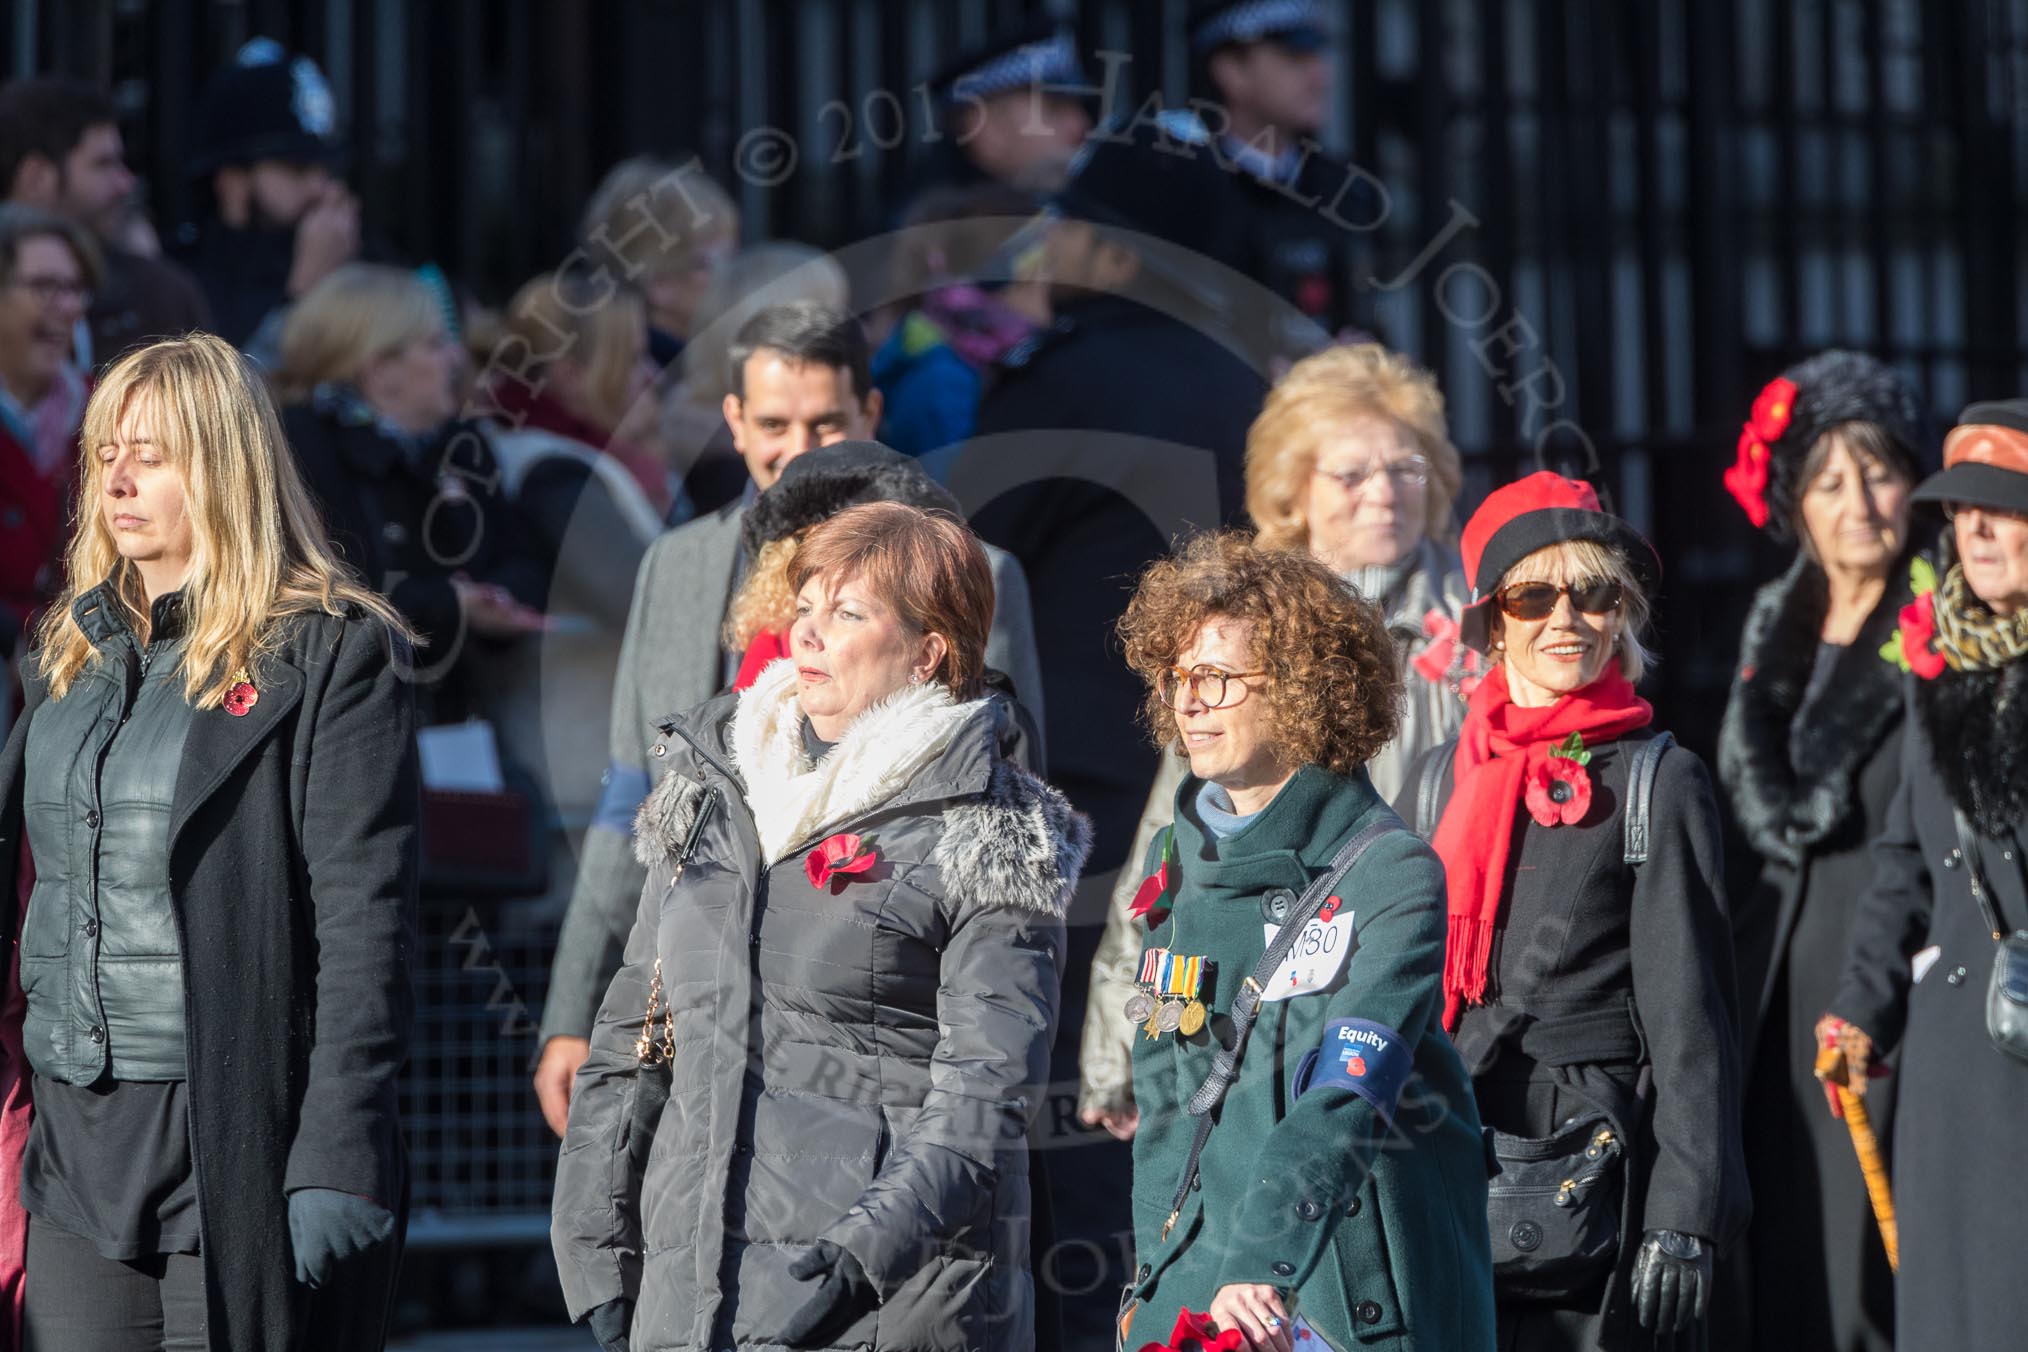 March Past, Remembrance Sunday at the Cenotaph 2016: M30 Equity.
Cenotaph, Whitehall, London SW1,
London,
Greater London,
United Kingdom,
on 13 November 2016 at 13:17, image #2768